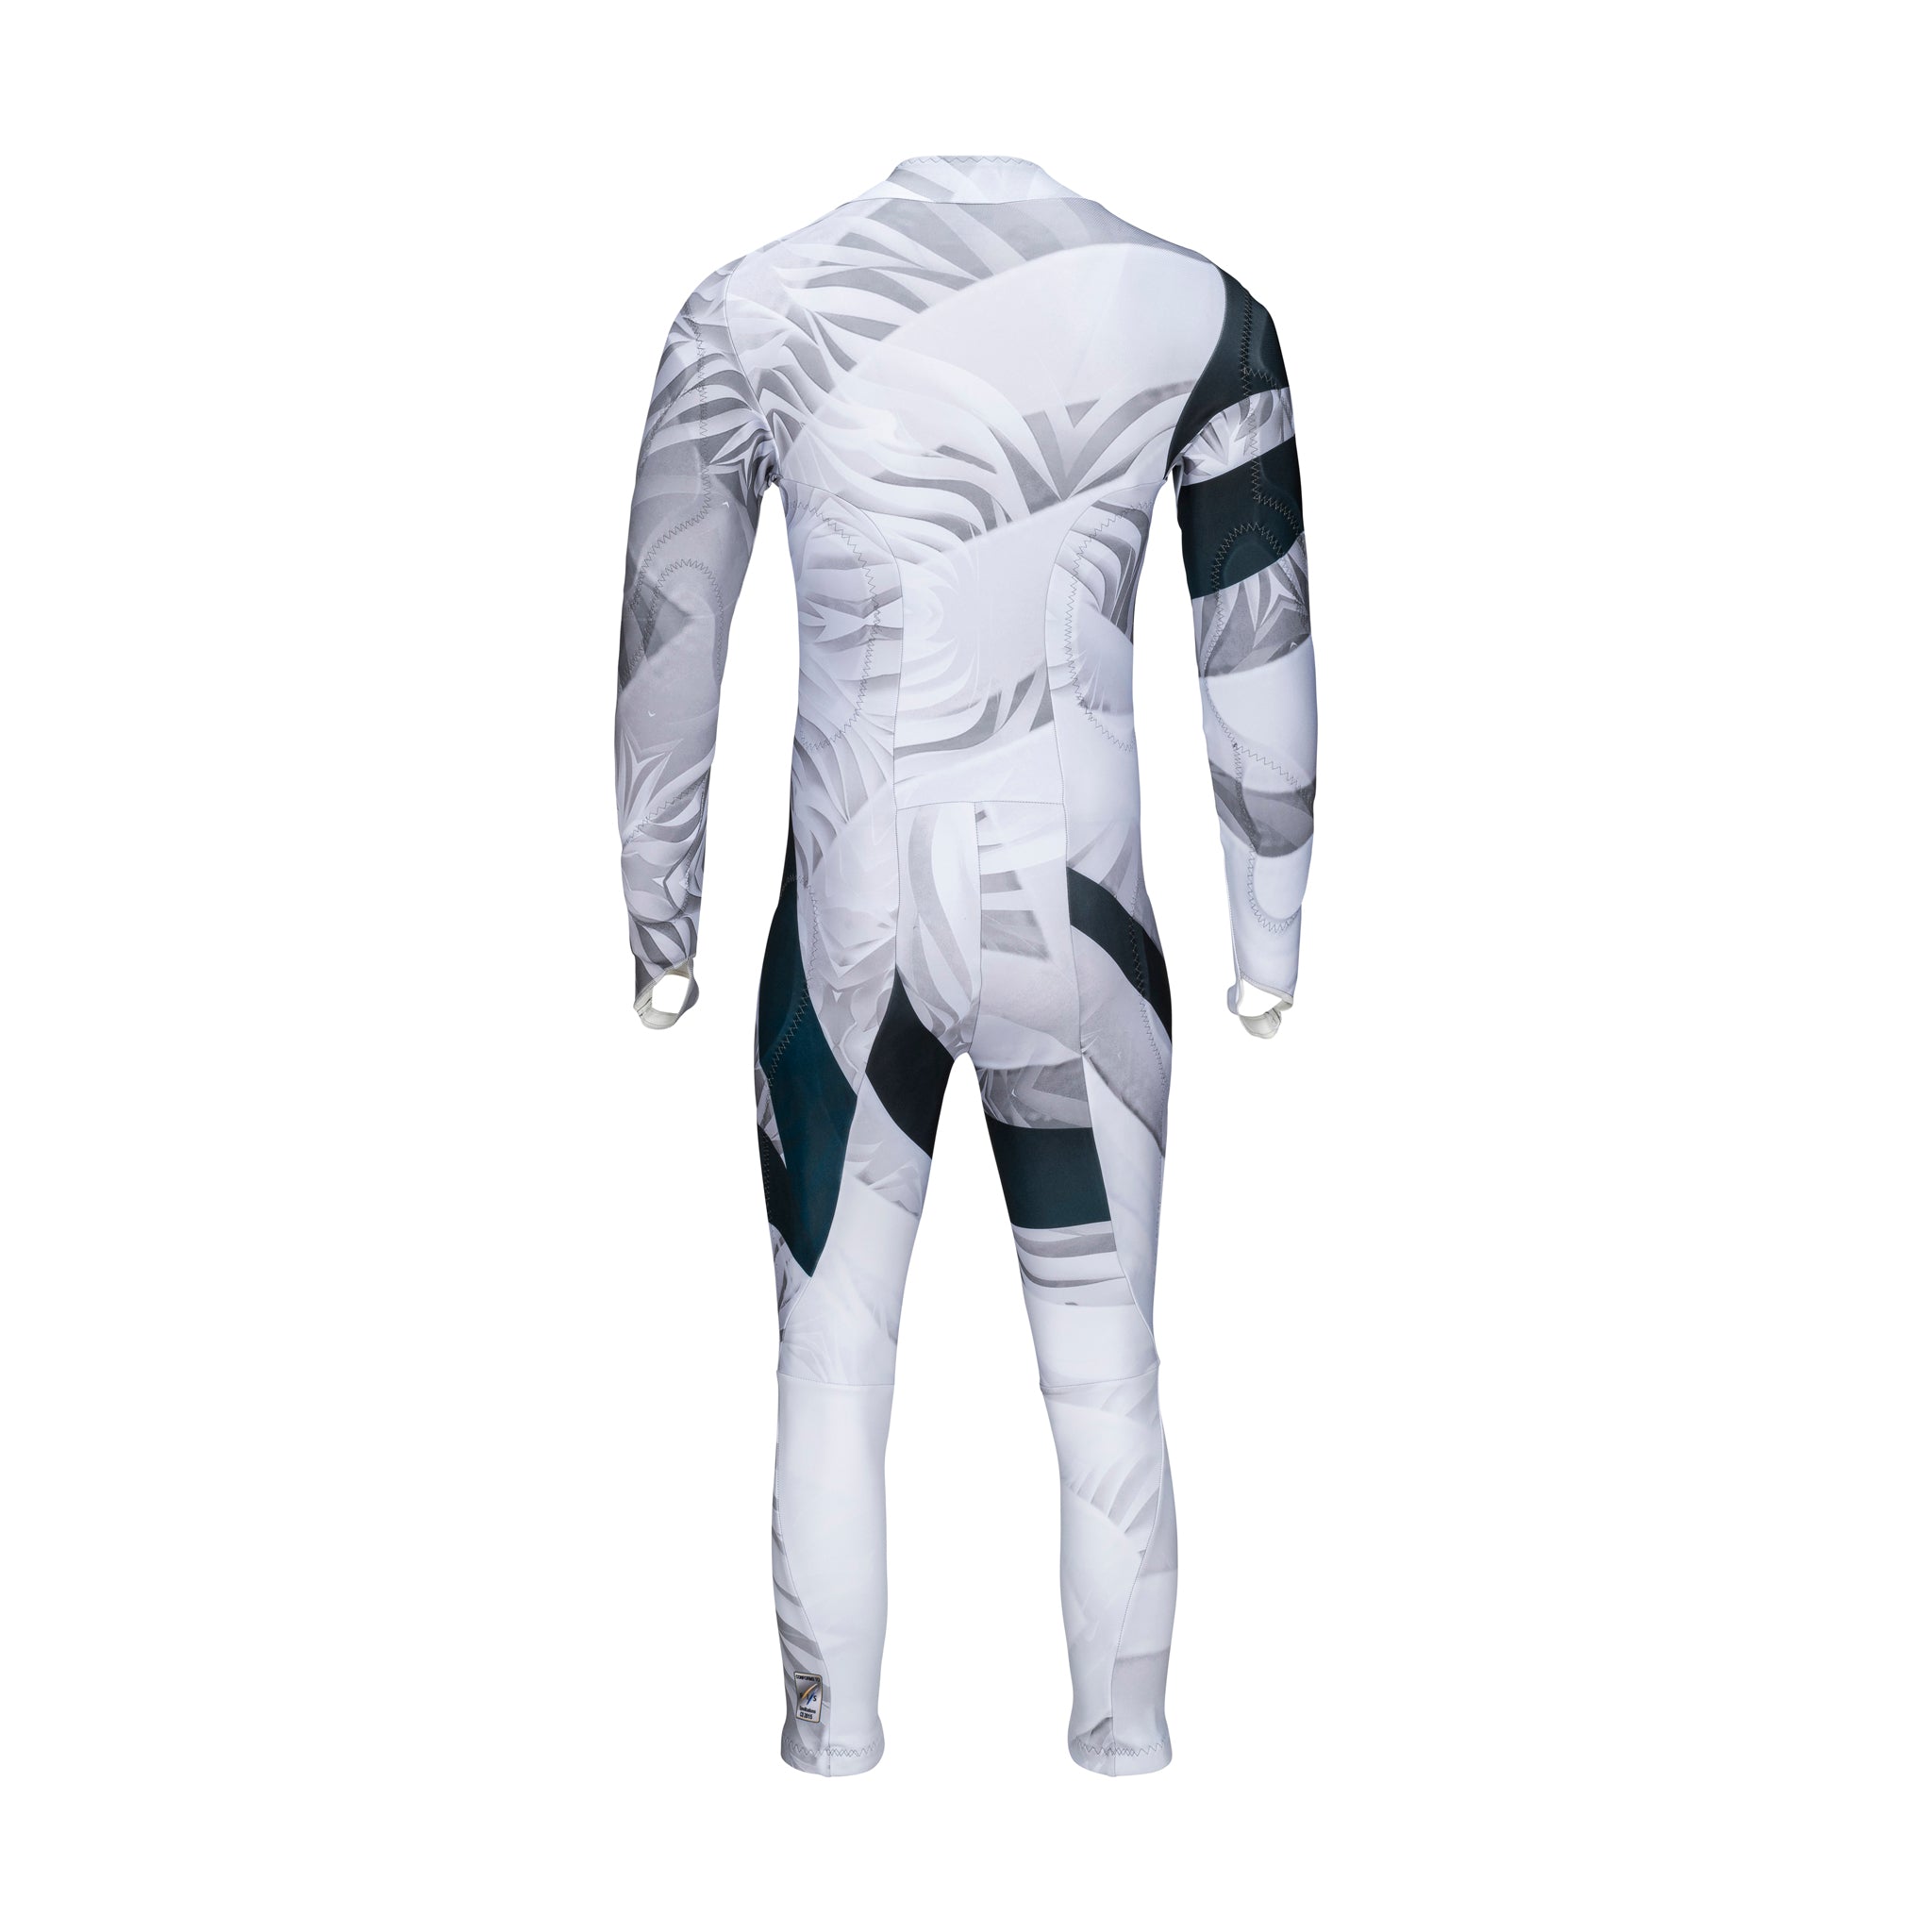 sync-performance-tiger-adult-suit-white-black-back